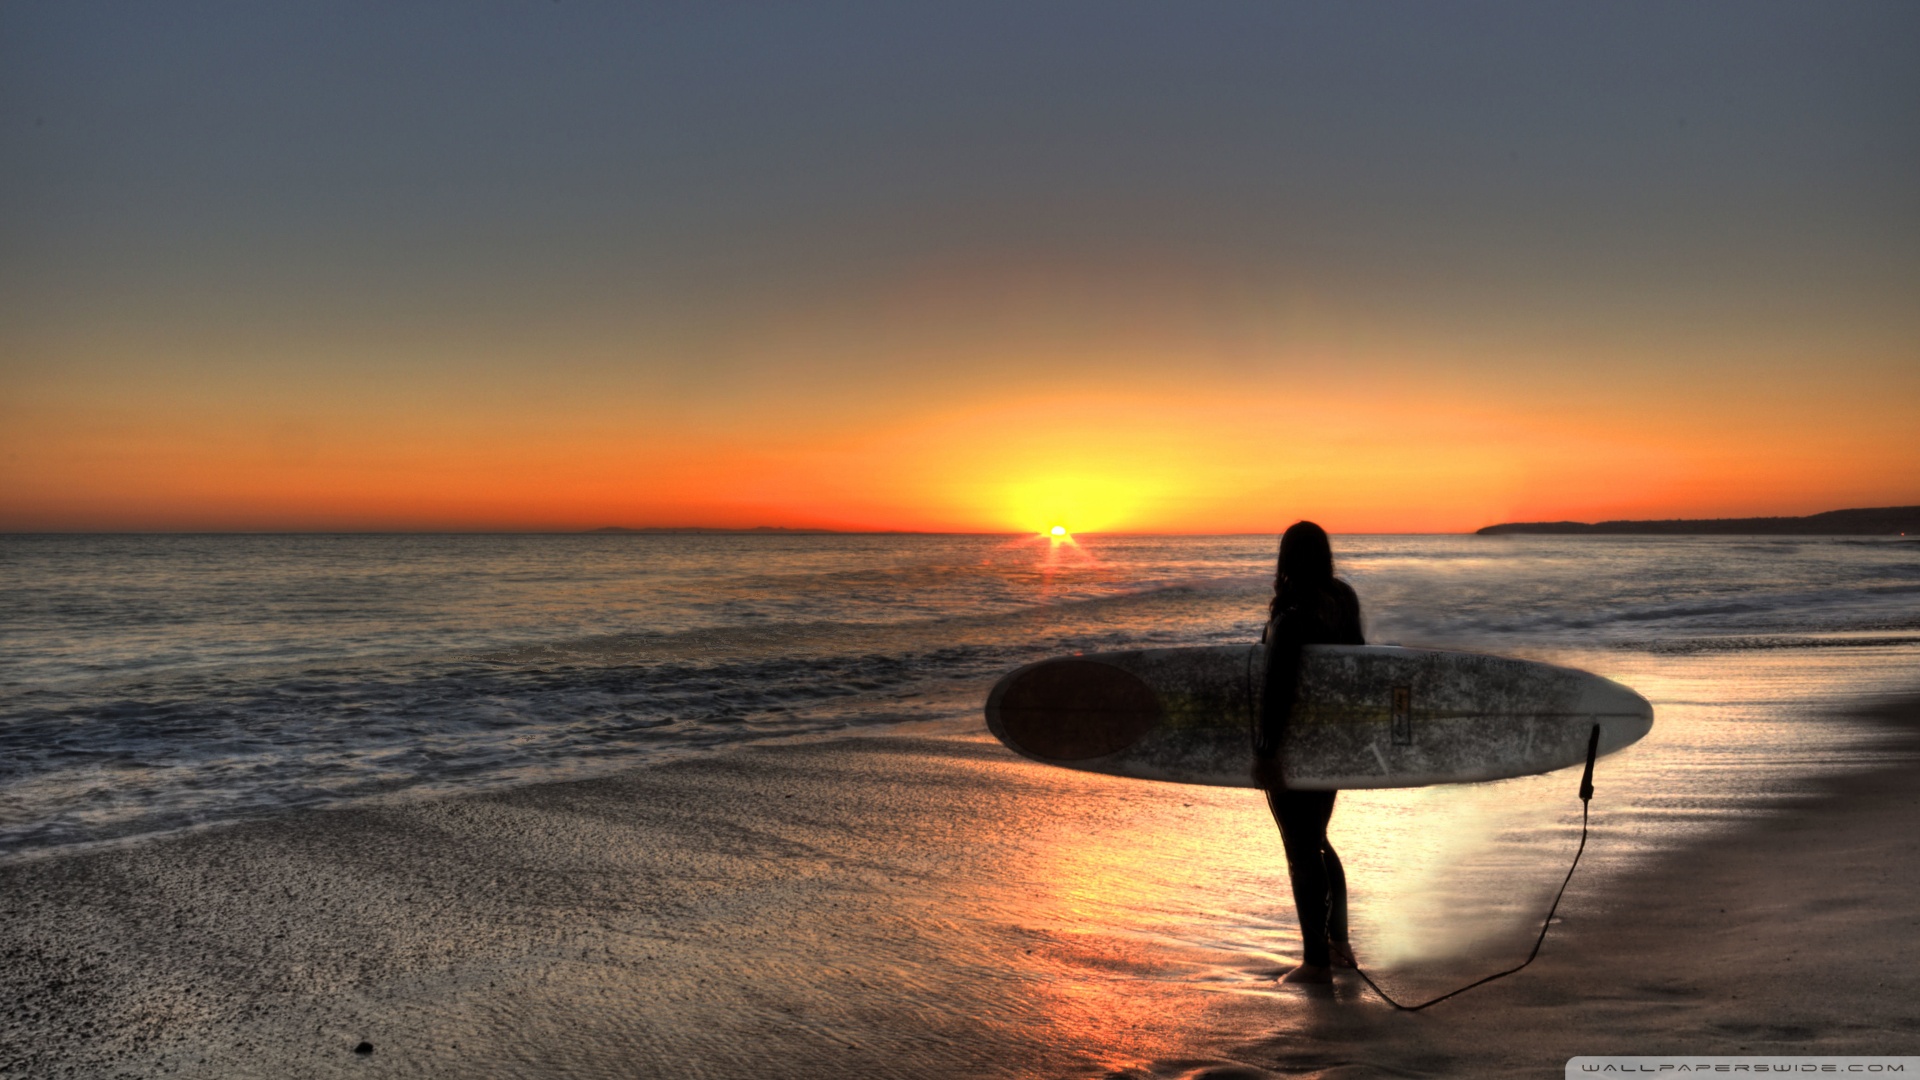 The Surfing Day Is Over 1920x1080 HD Wallpaper Sport / Surfing